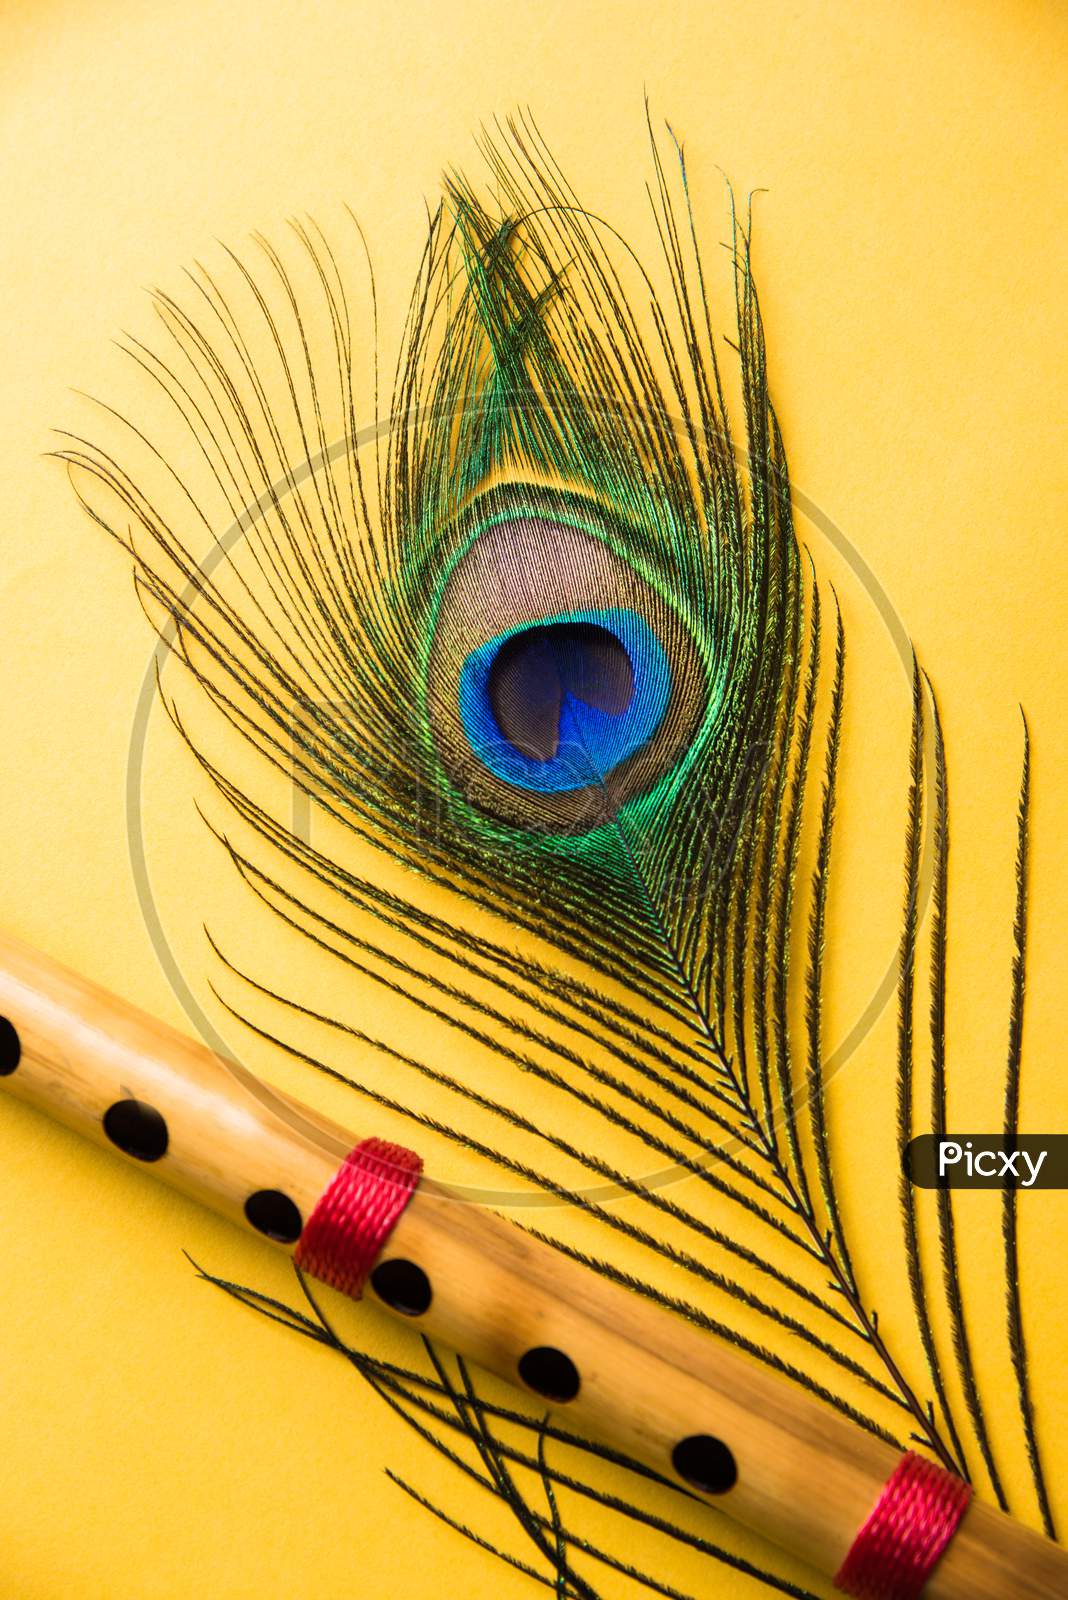 Image of peacock feather and bamboo flute over colourful background